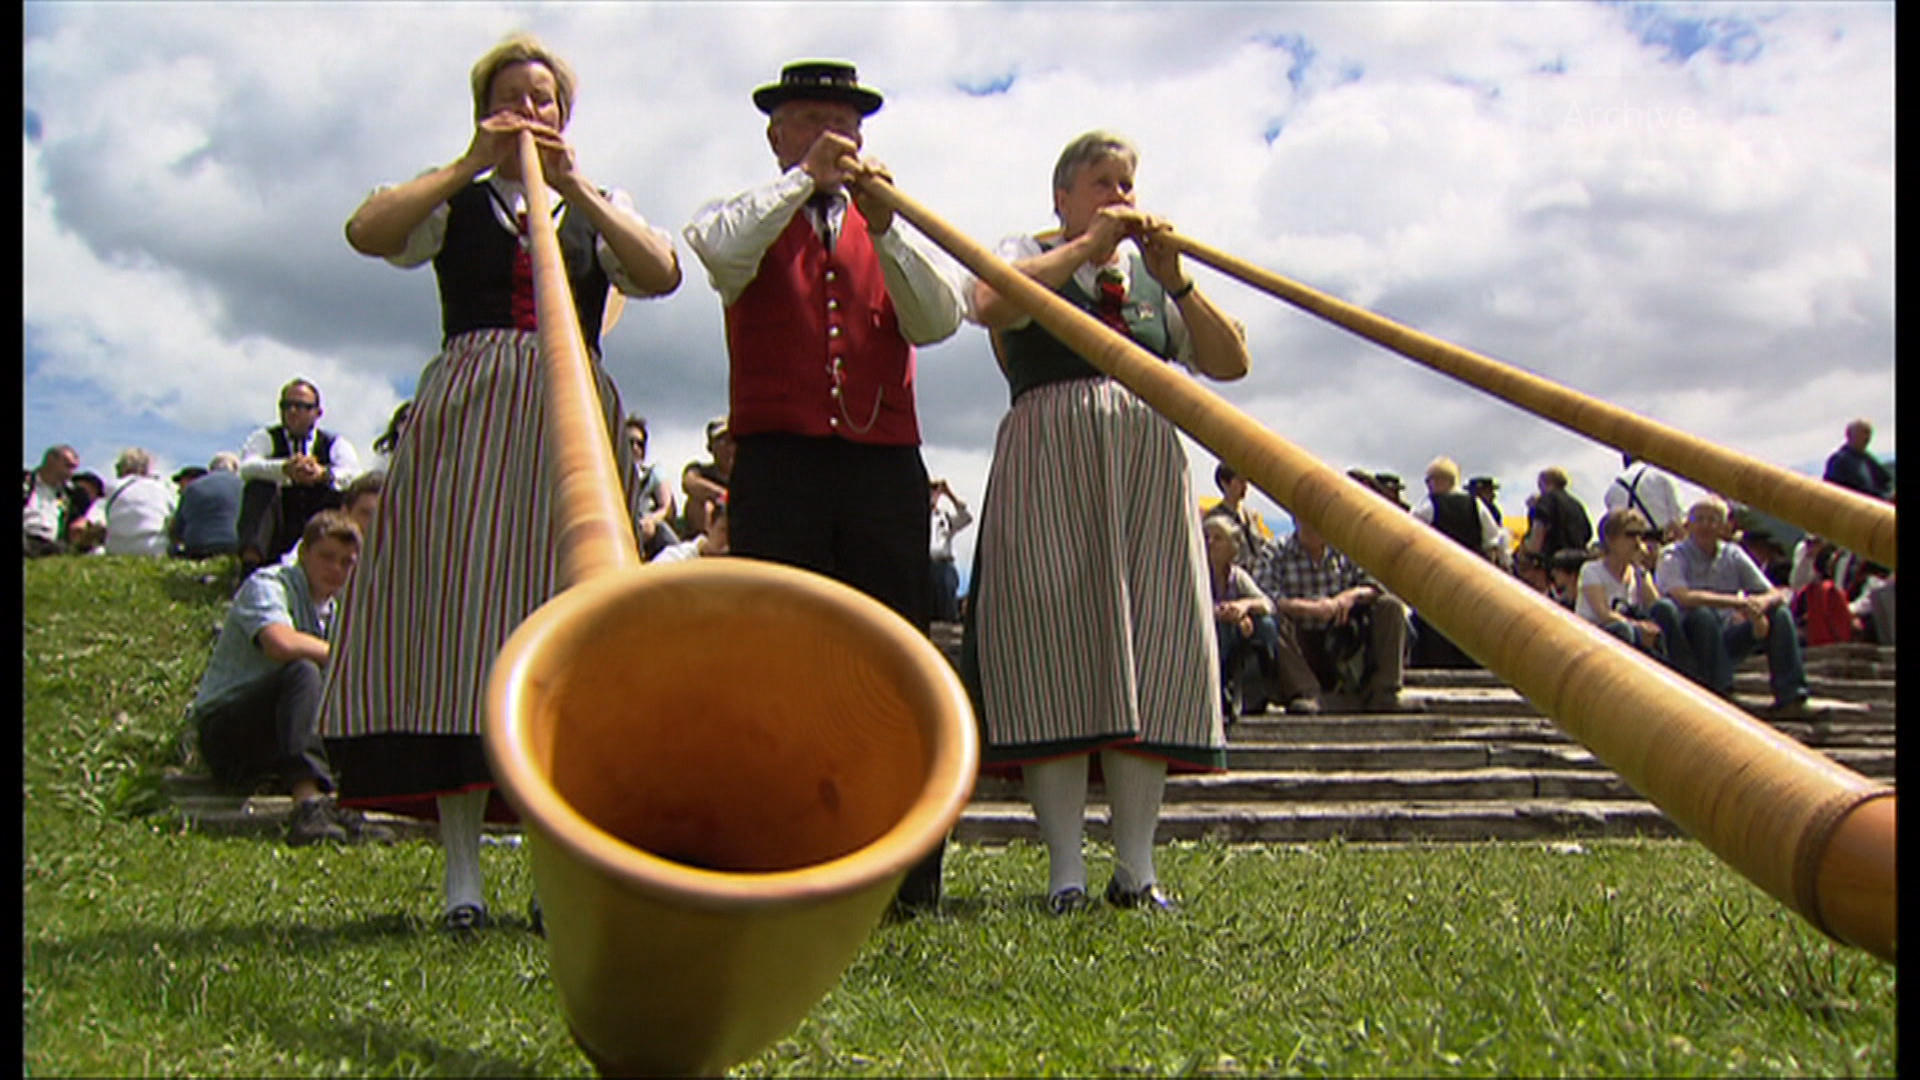 Two women and one man playing the alphorn.